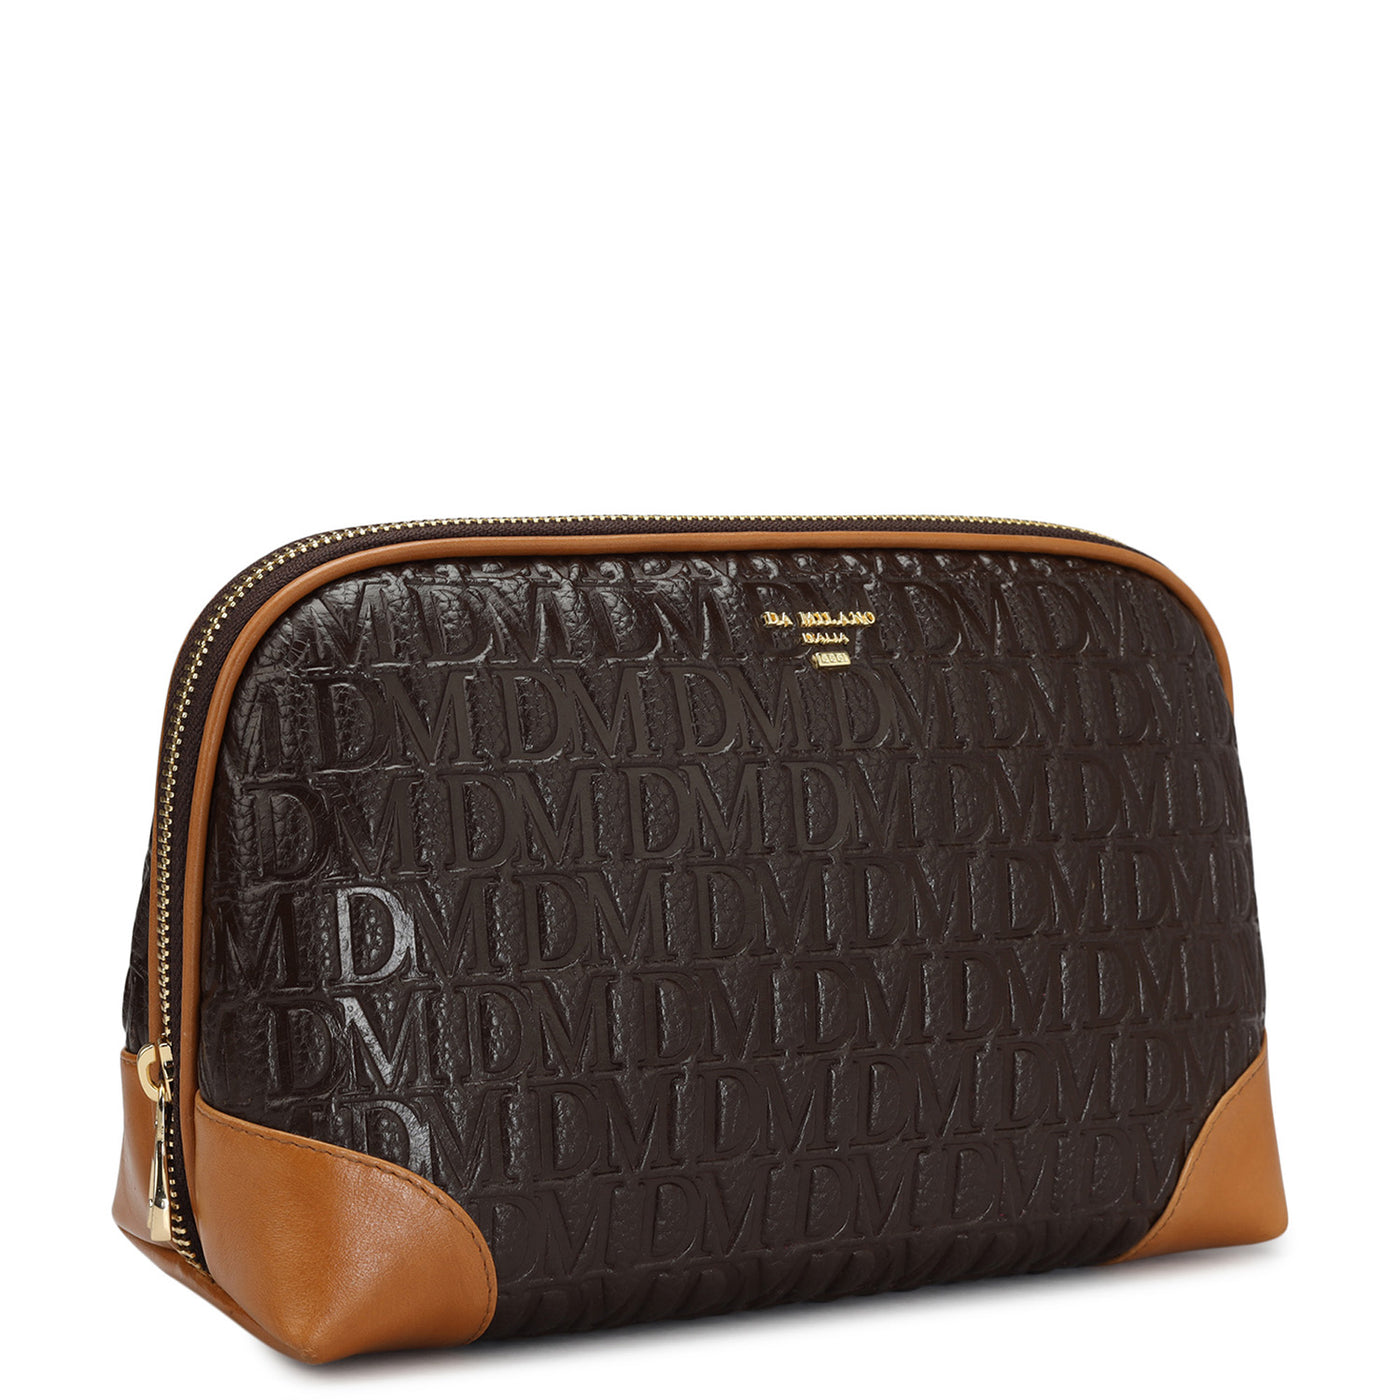 Monogram Leather Multi Pouch - Chocolate